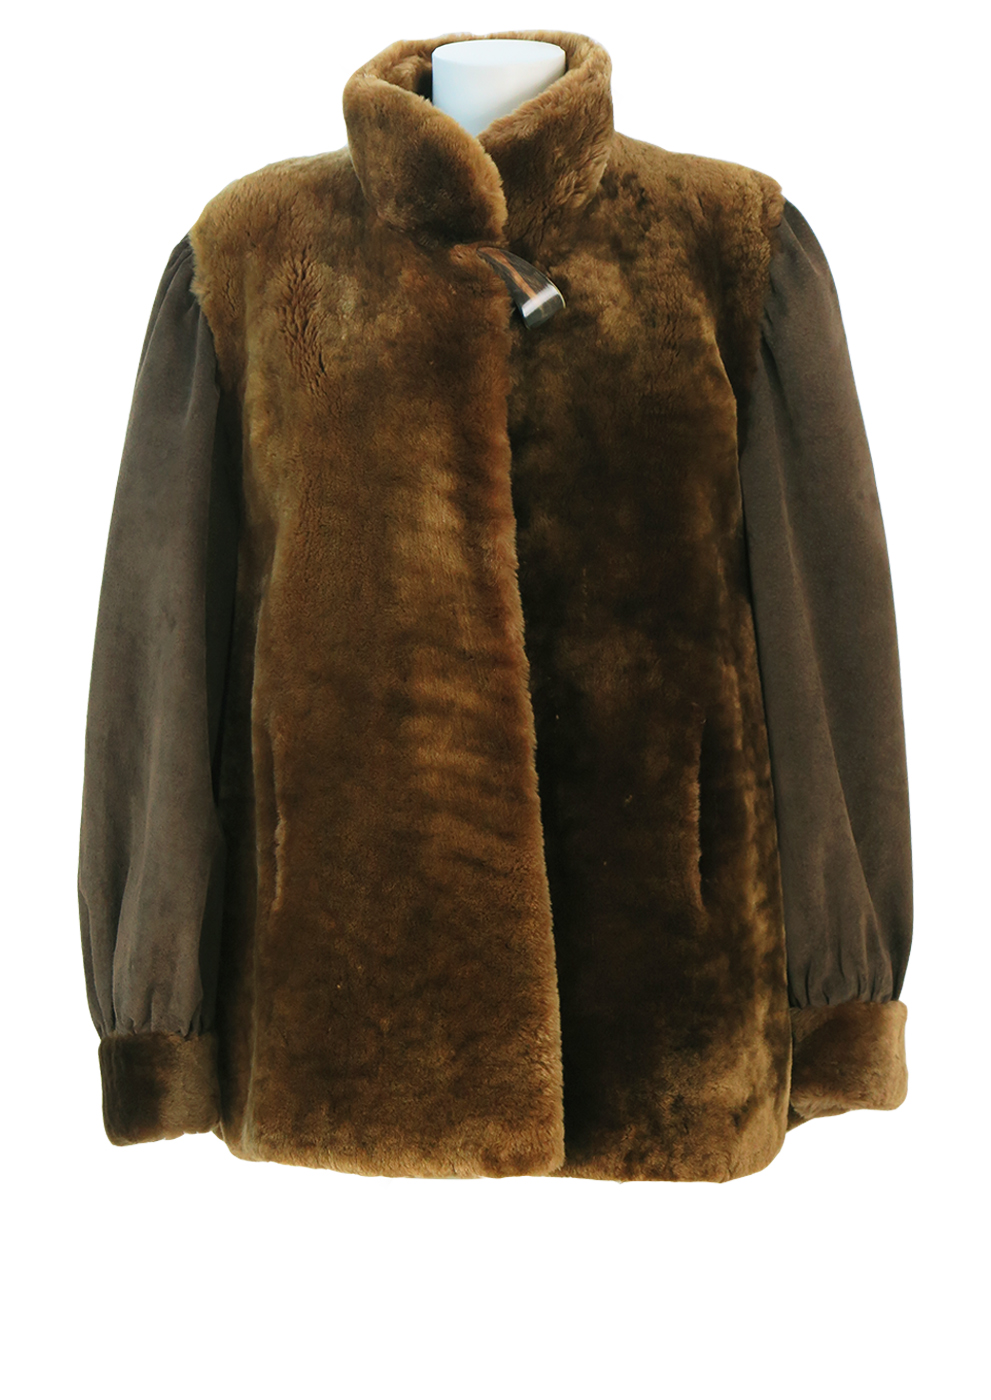 Brown Shearling Jacket with Brown Suede Sleeve Detail & Feature Button ...